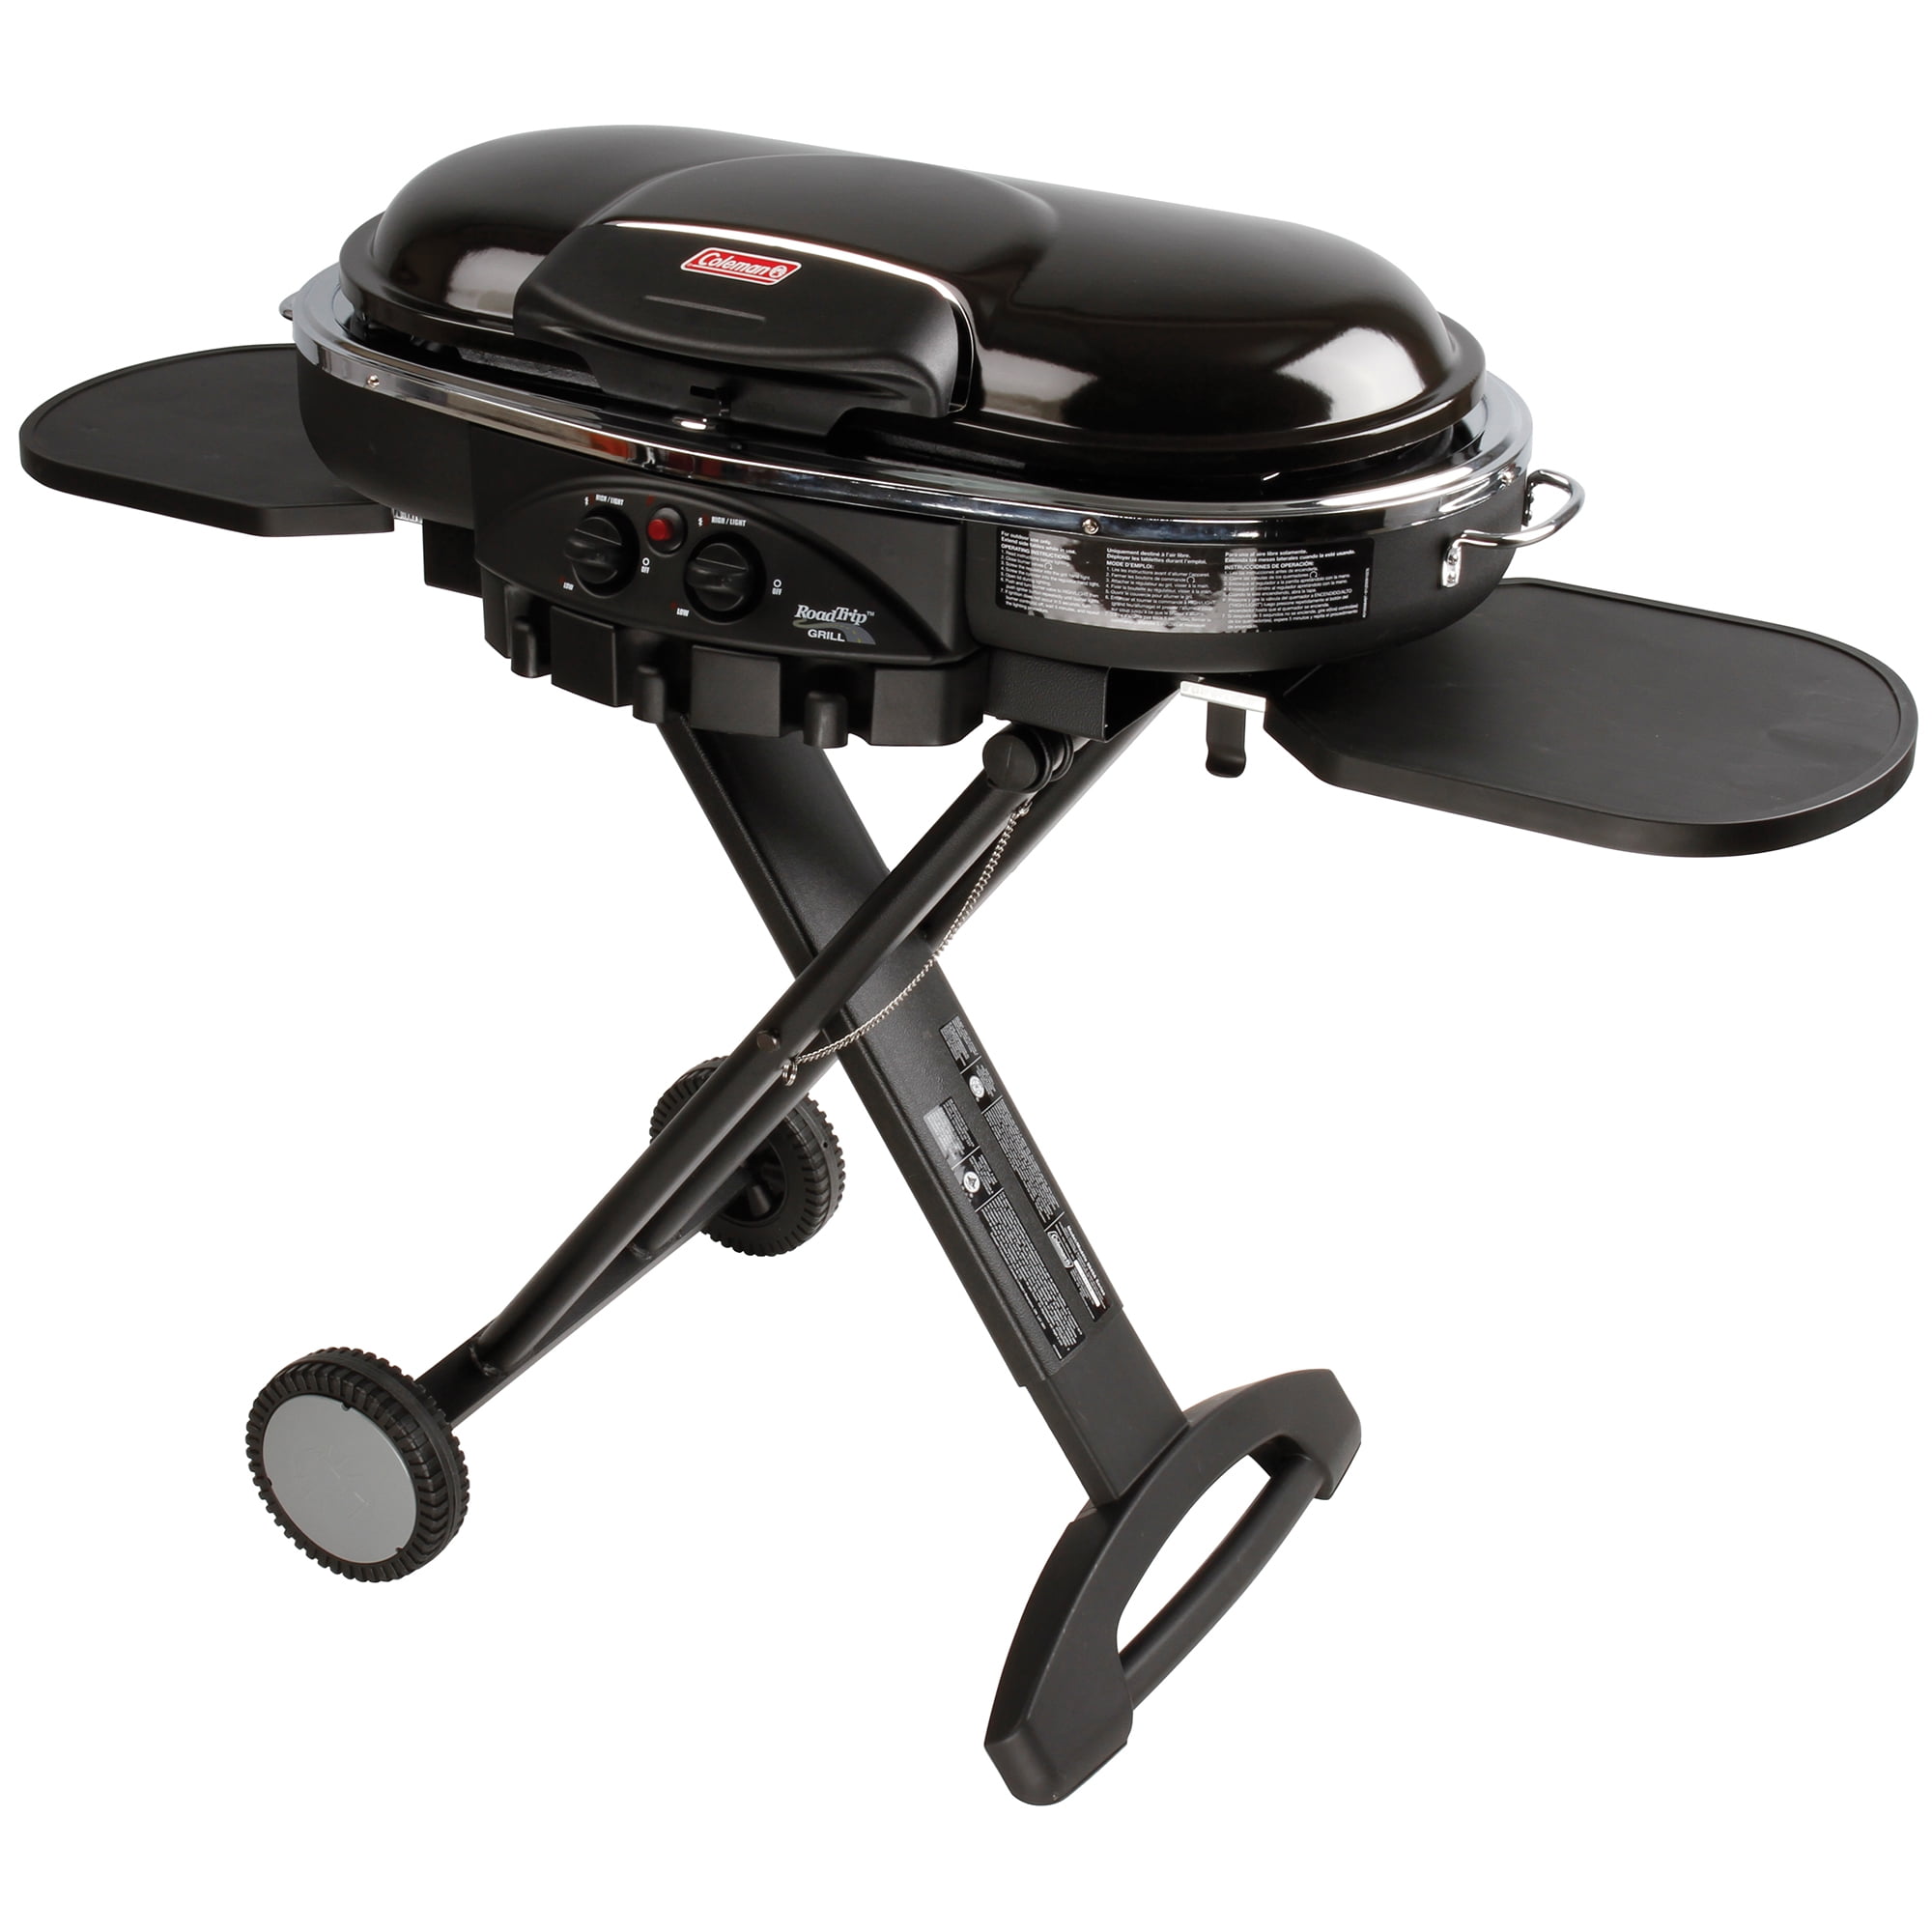 Coleman RoadTrip LXE Portable Stand Up Propane Grill, Black